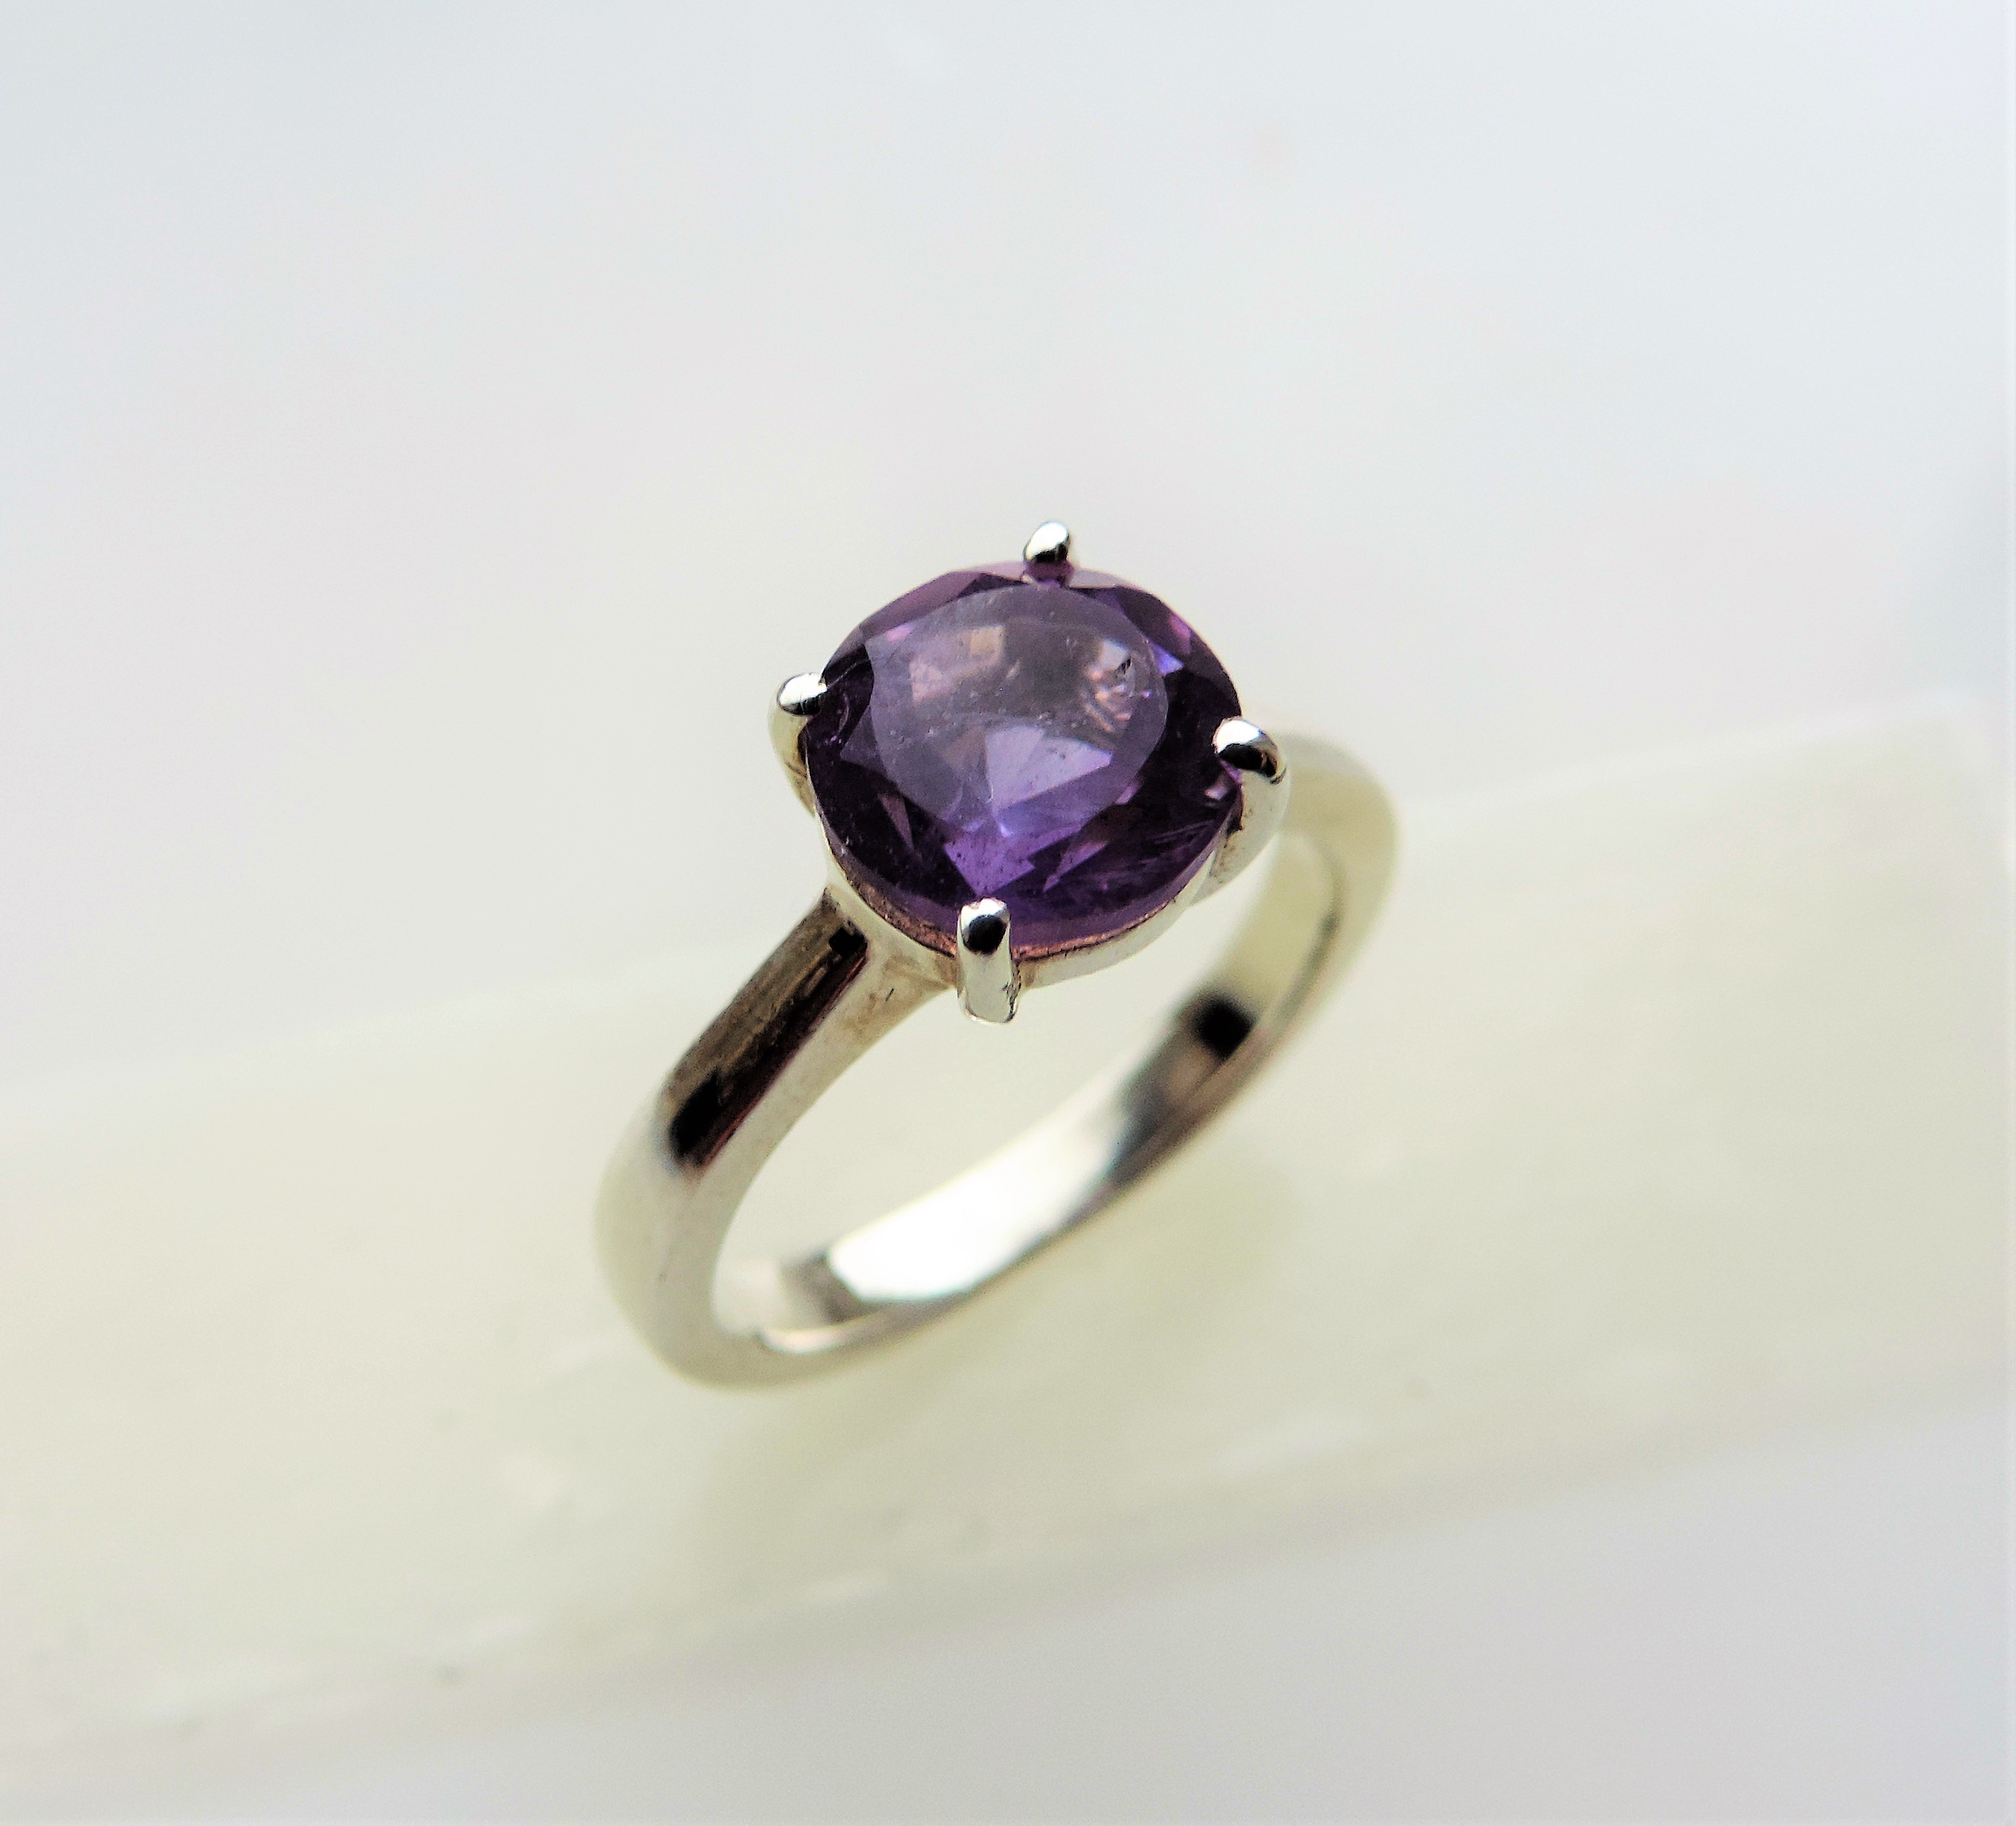 1.8 carat Amethyst Solitaire Ring - Image 3 of 3